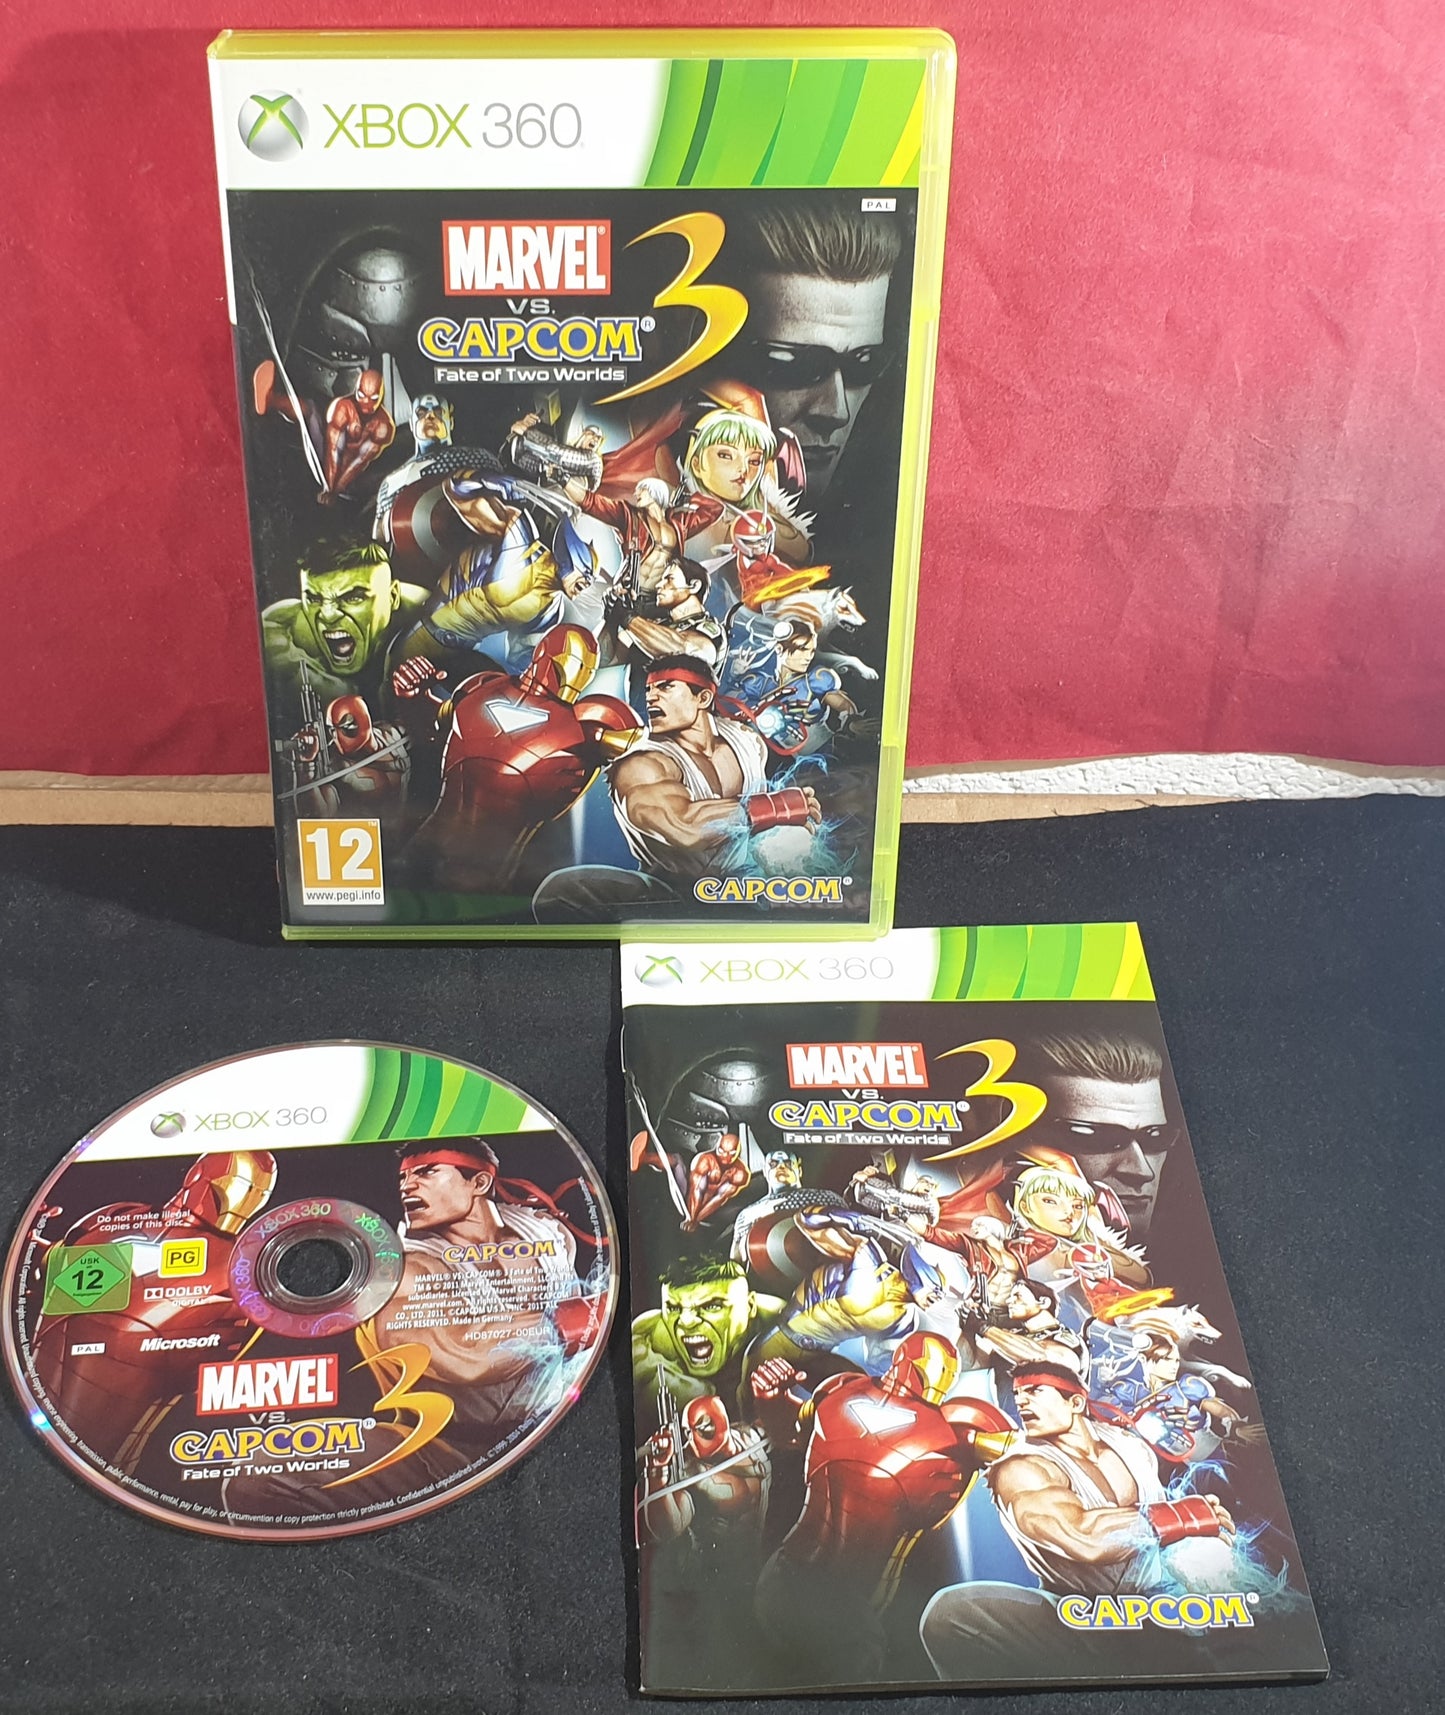 Marvel Vs Capcom 3 Fate of Two Worlds Microsoft Xbox 360 Game